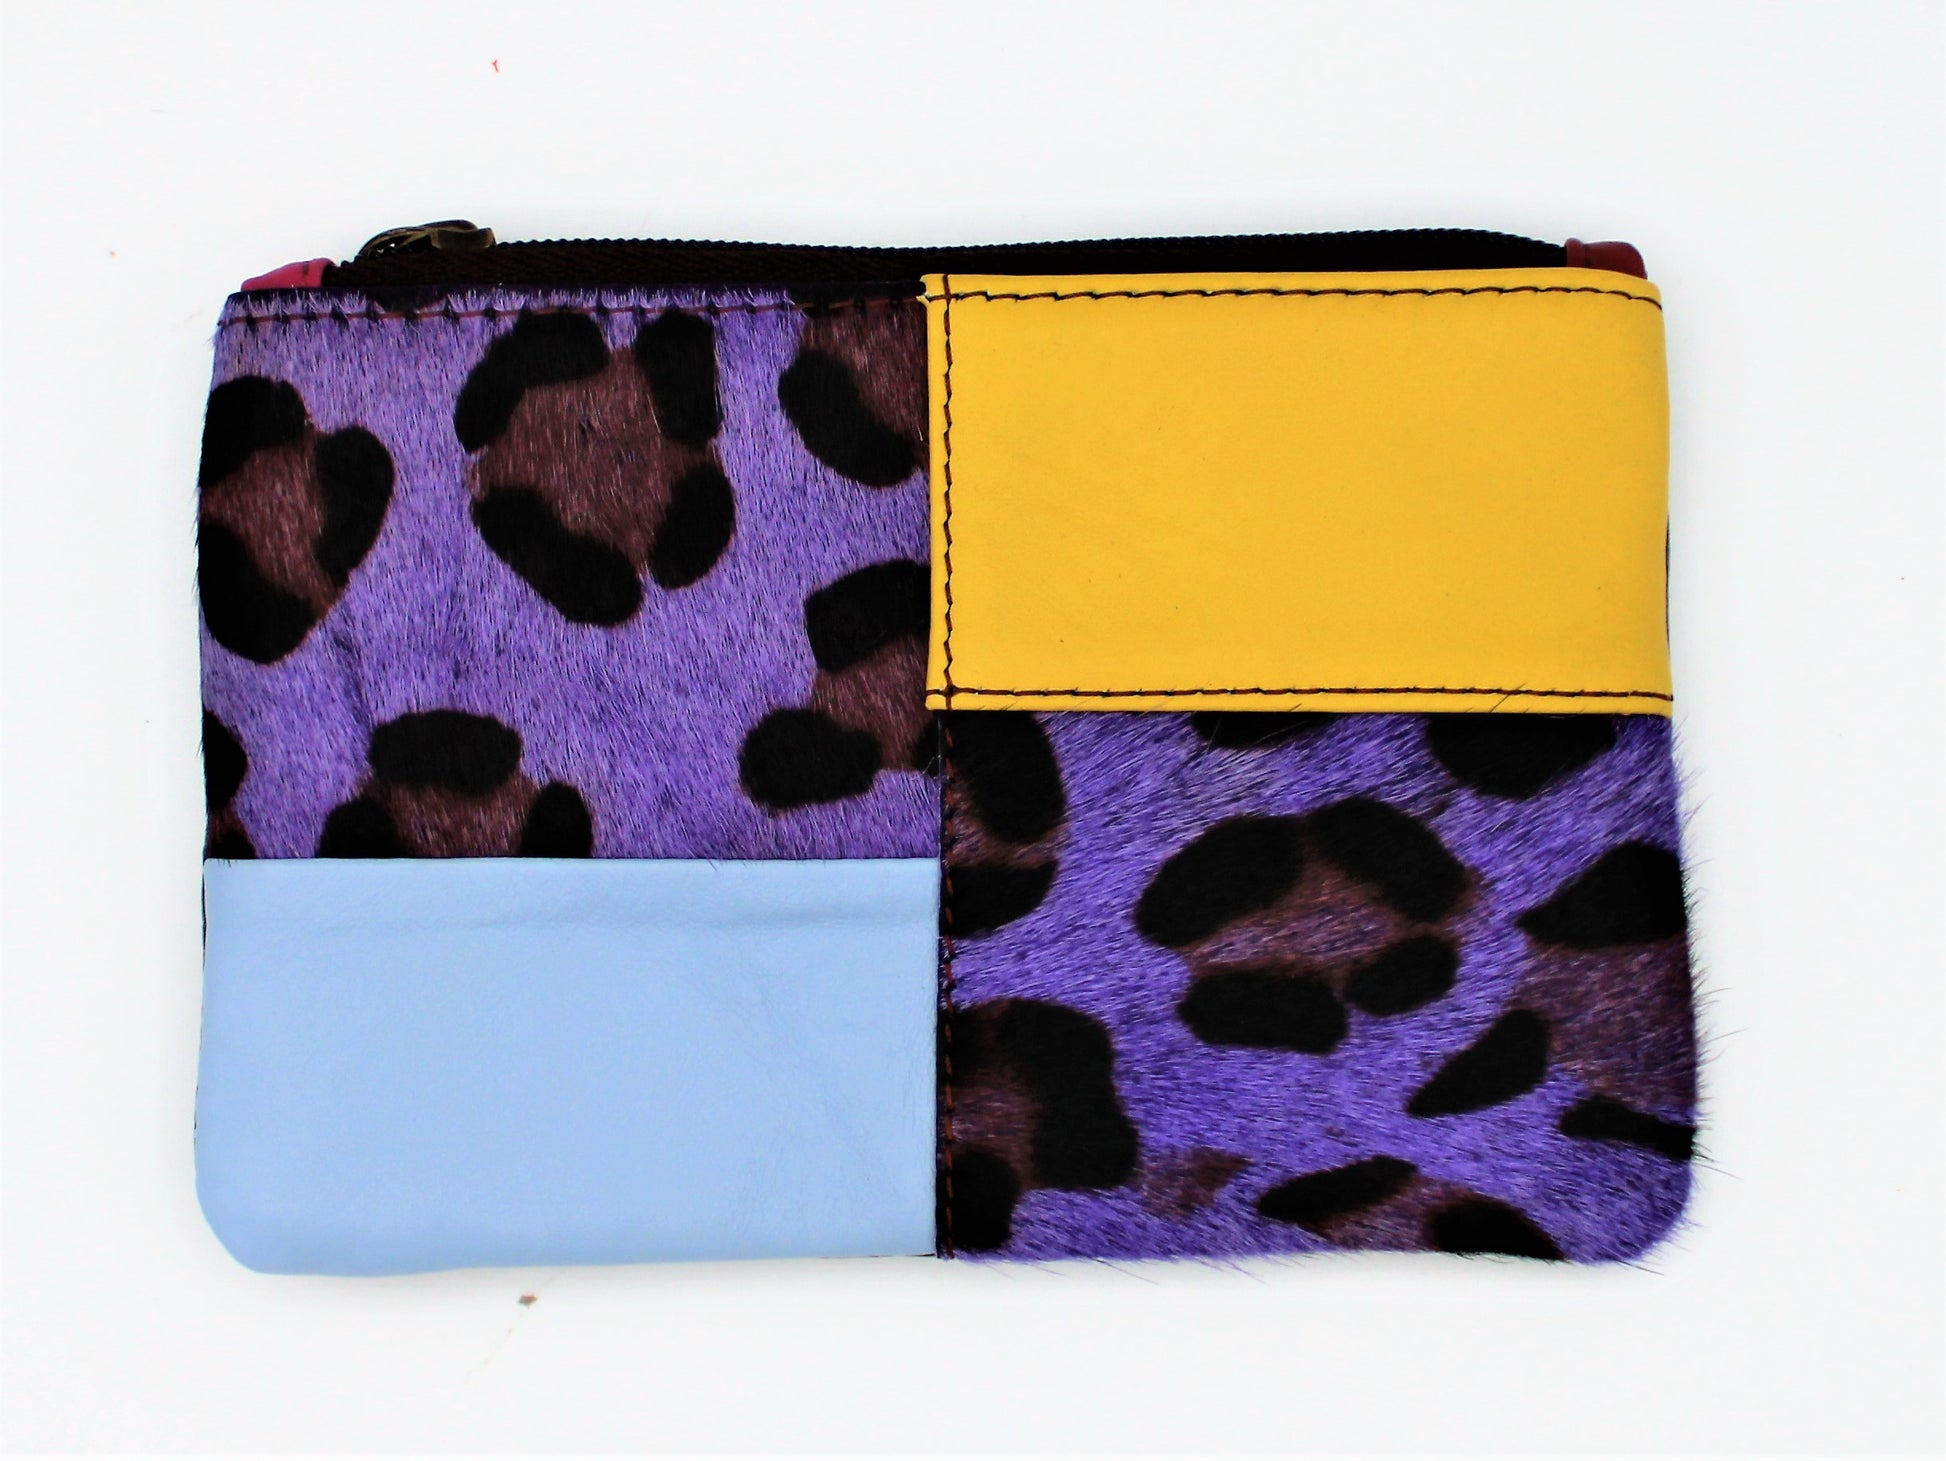 Zahra Print Leather Bag in Yellow, Blue and Purple Animal Print